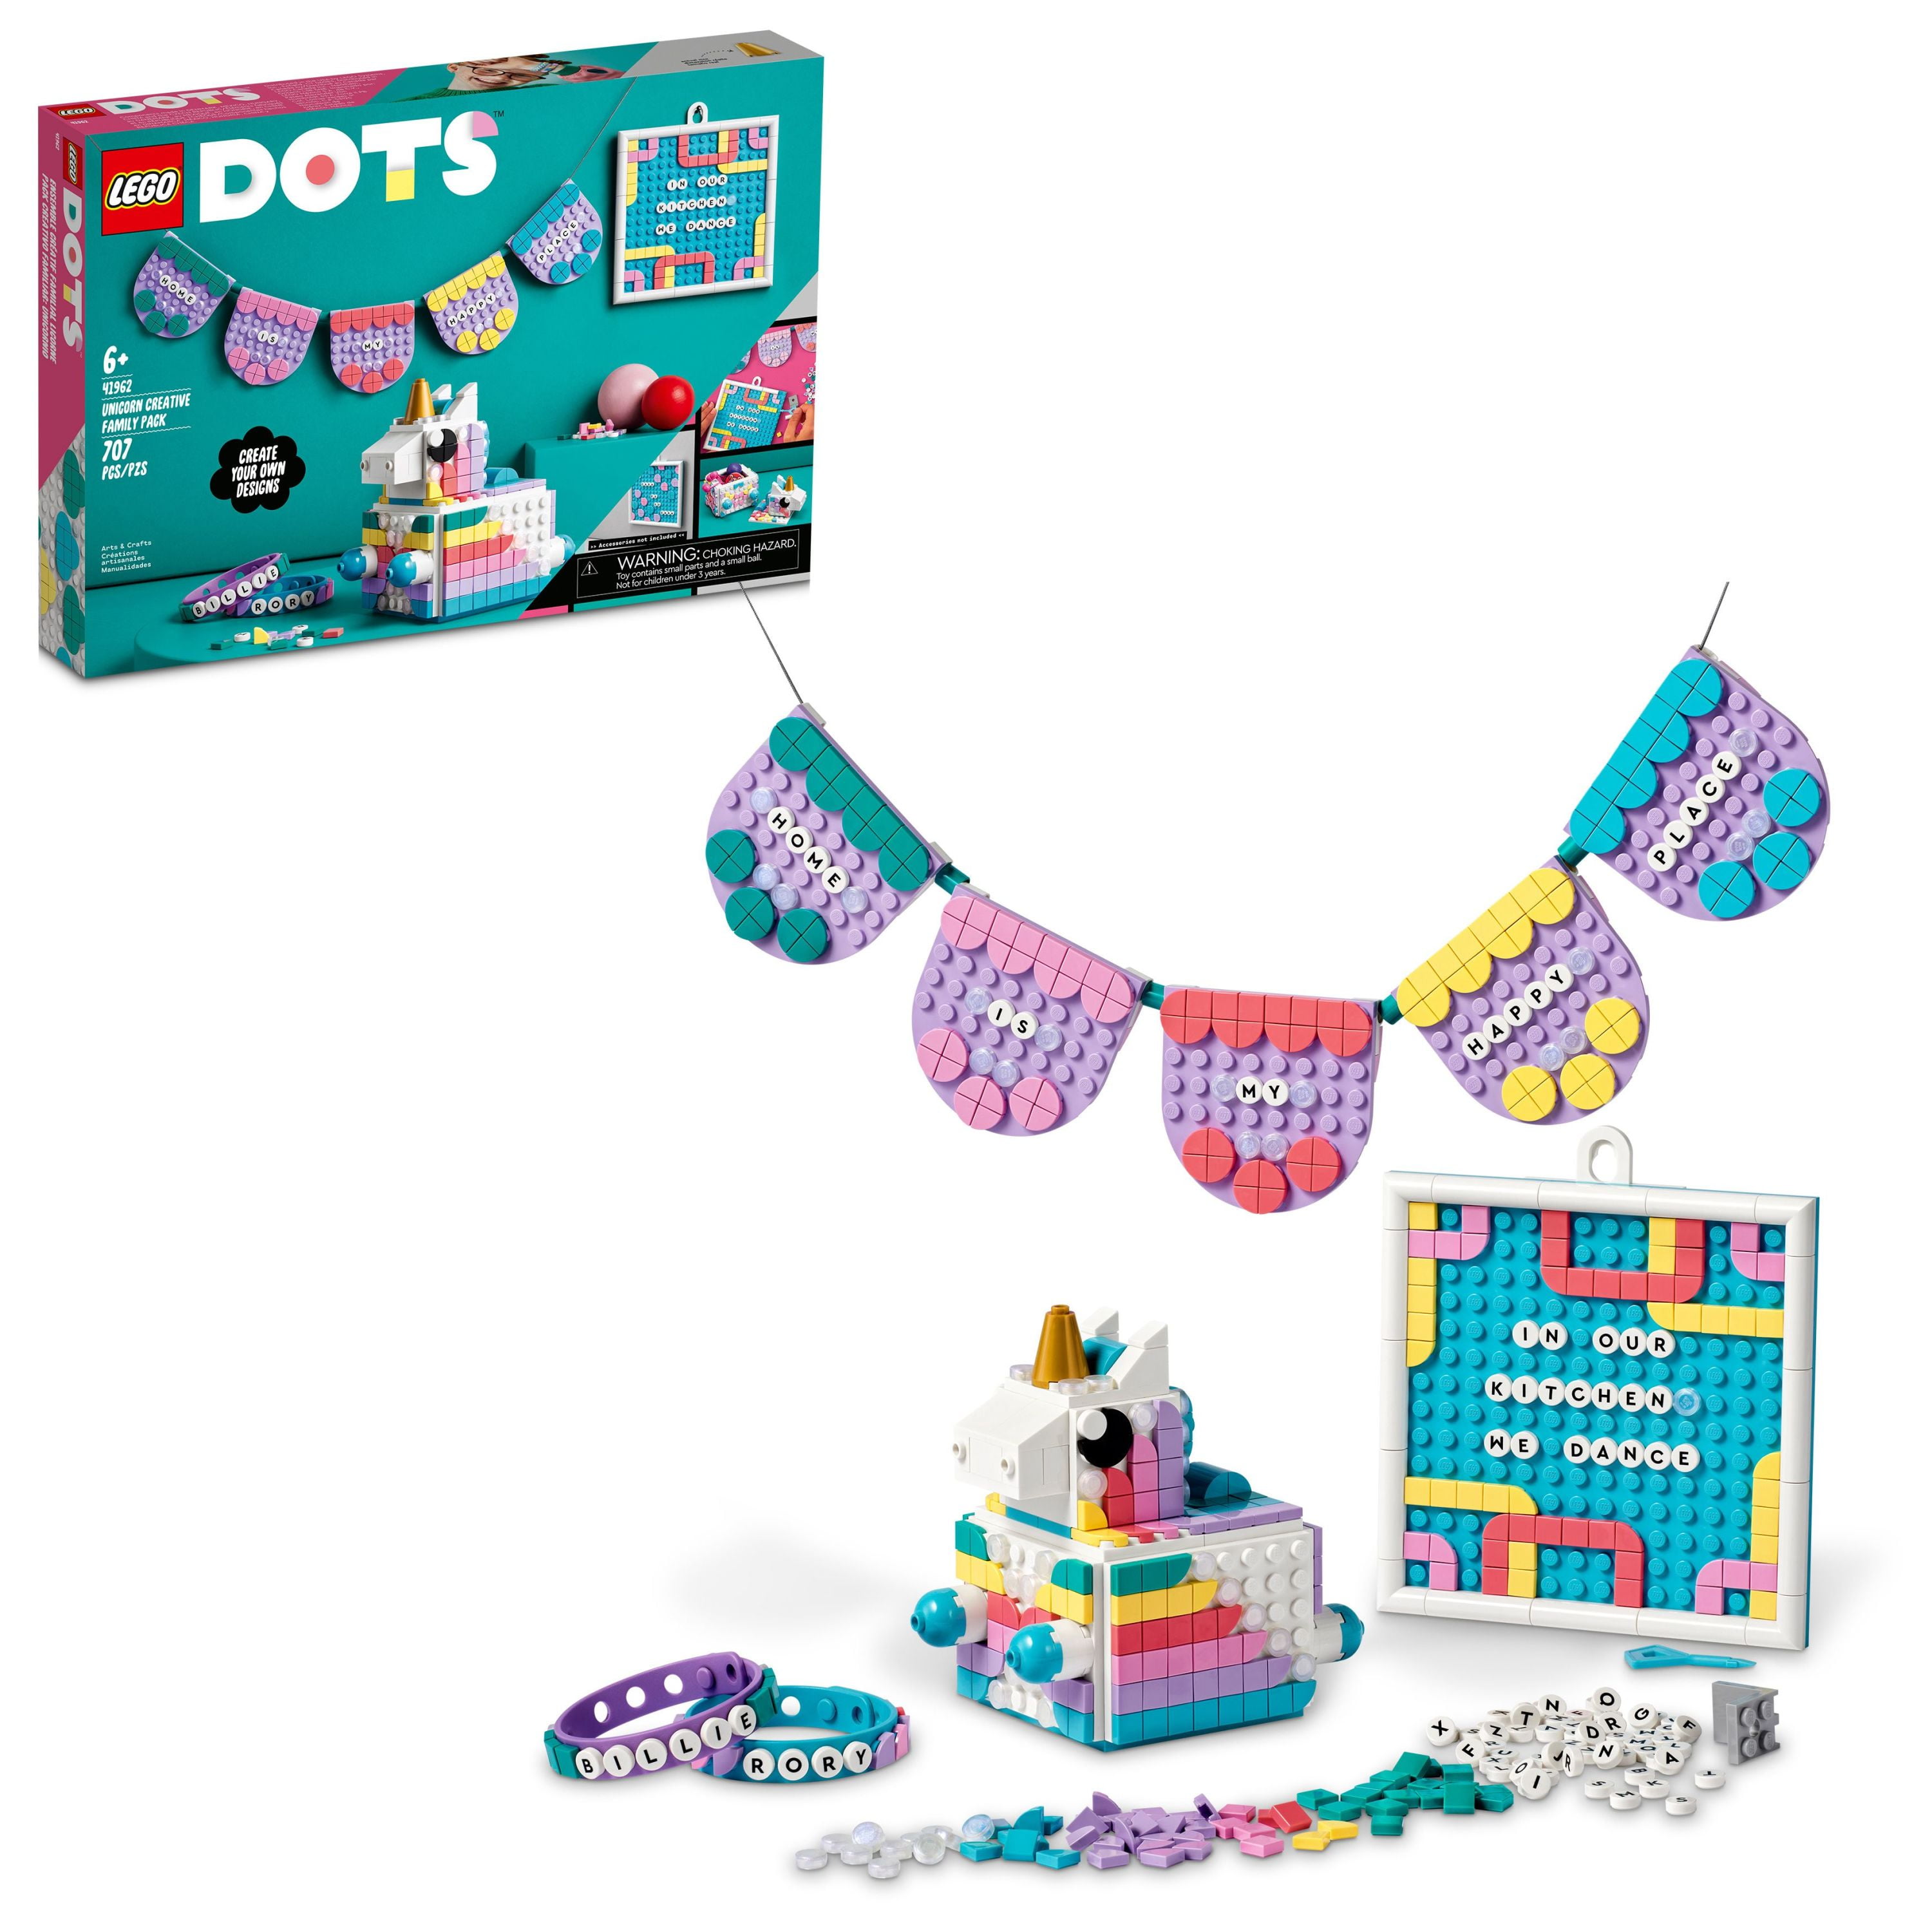 Lego Dots Bracelet Review for Your Creative Littles